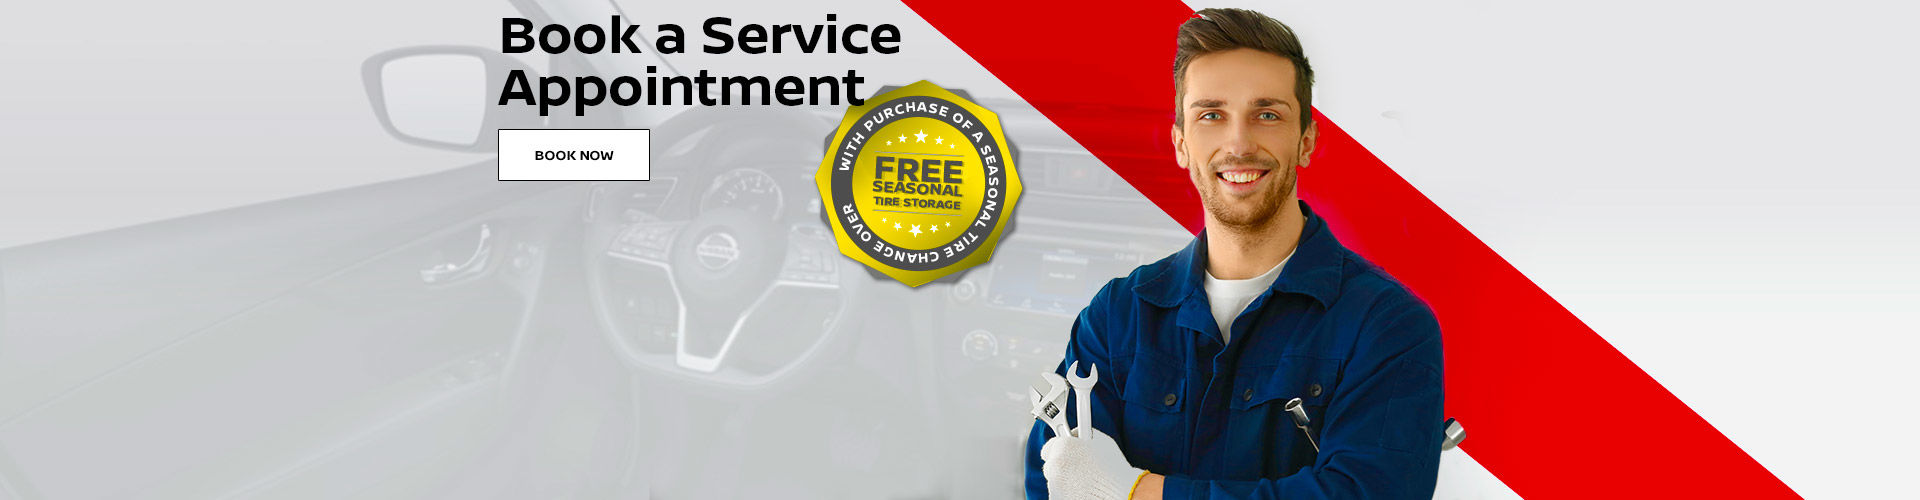 Book A Service Appointment (headers)